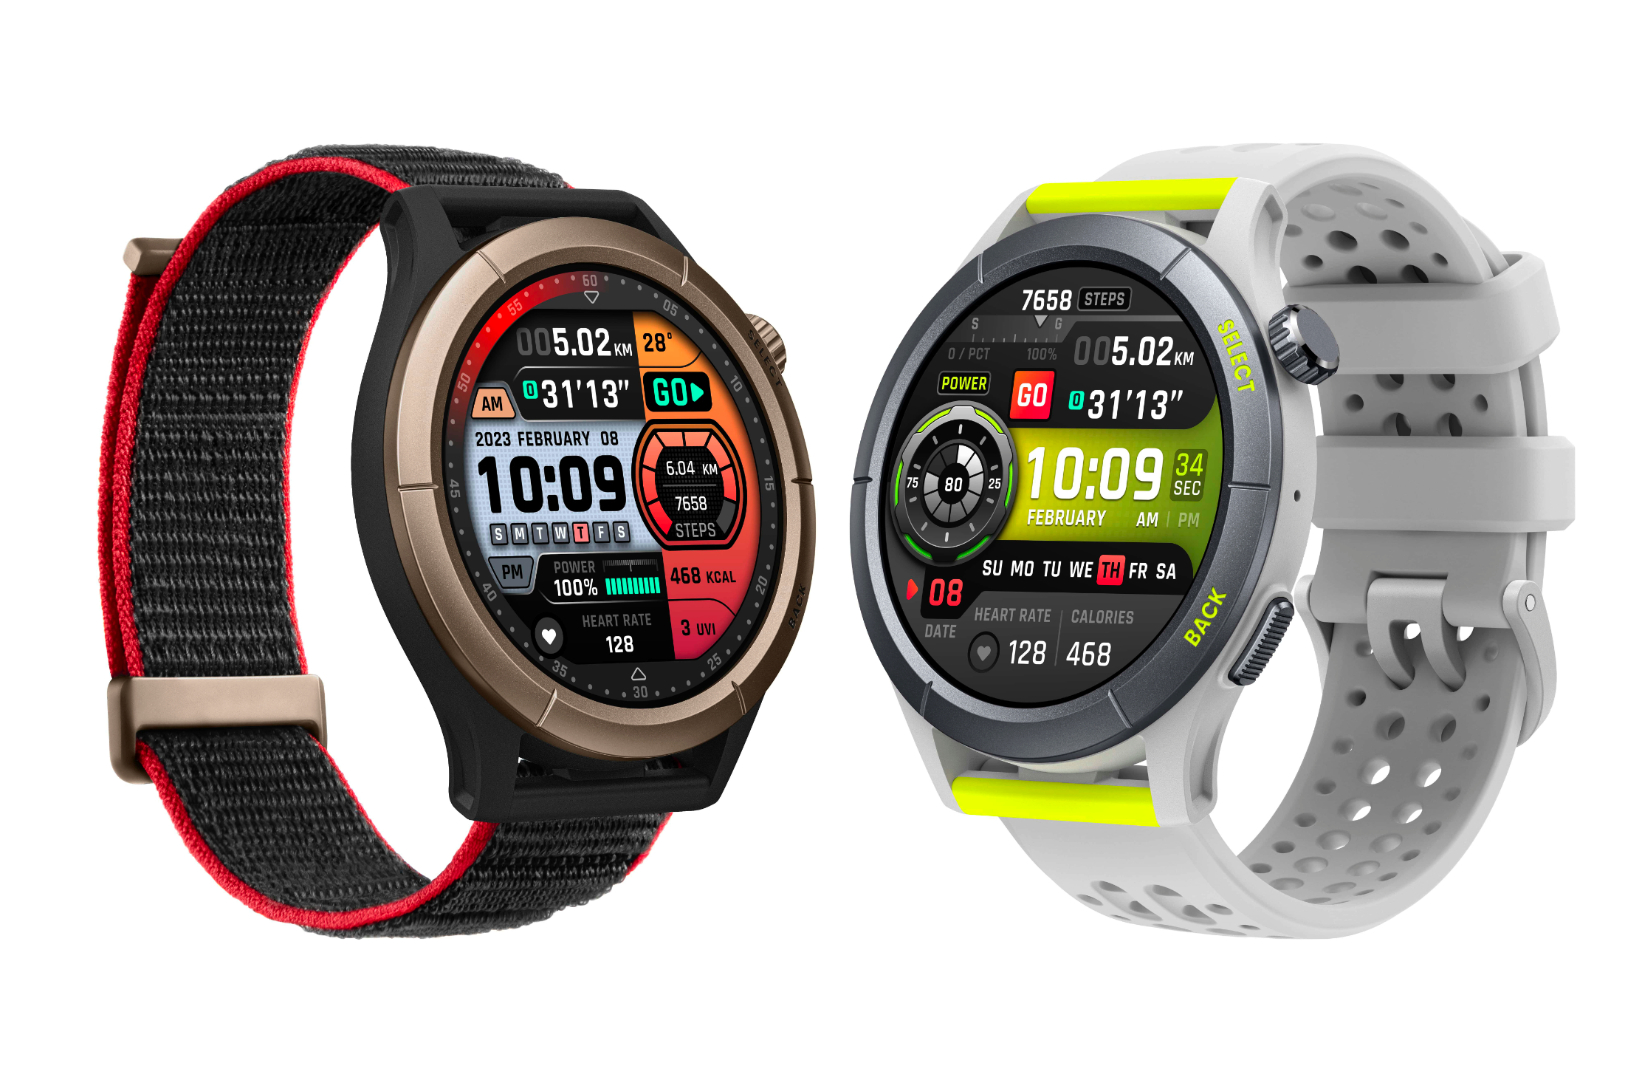 Amazfit unveils new Cheetah series and Amazfit Cheetah and Cheetah Pro  smartwatches for runners